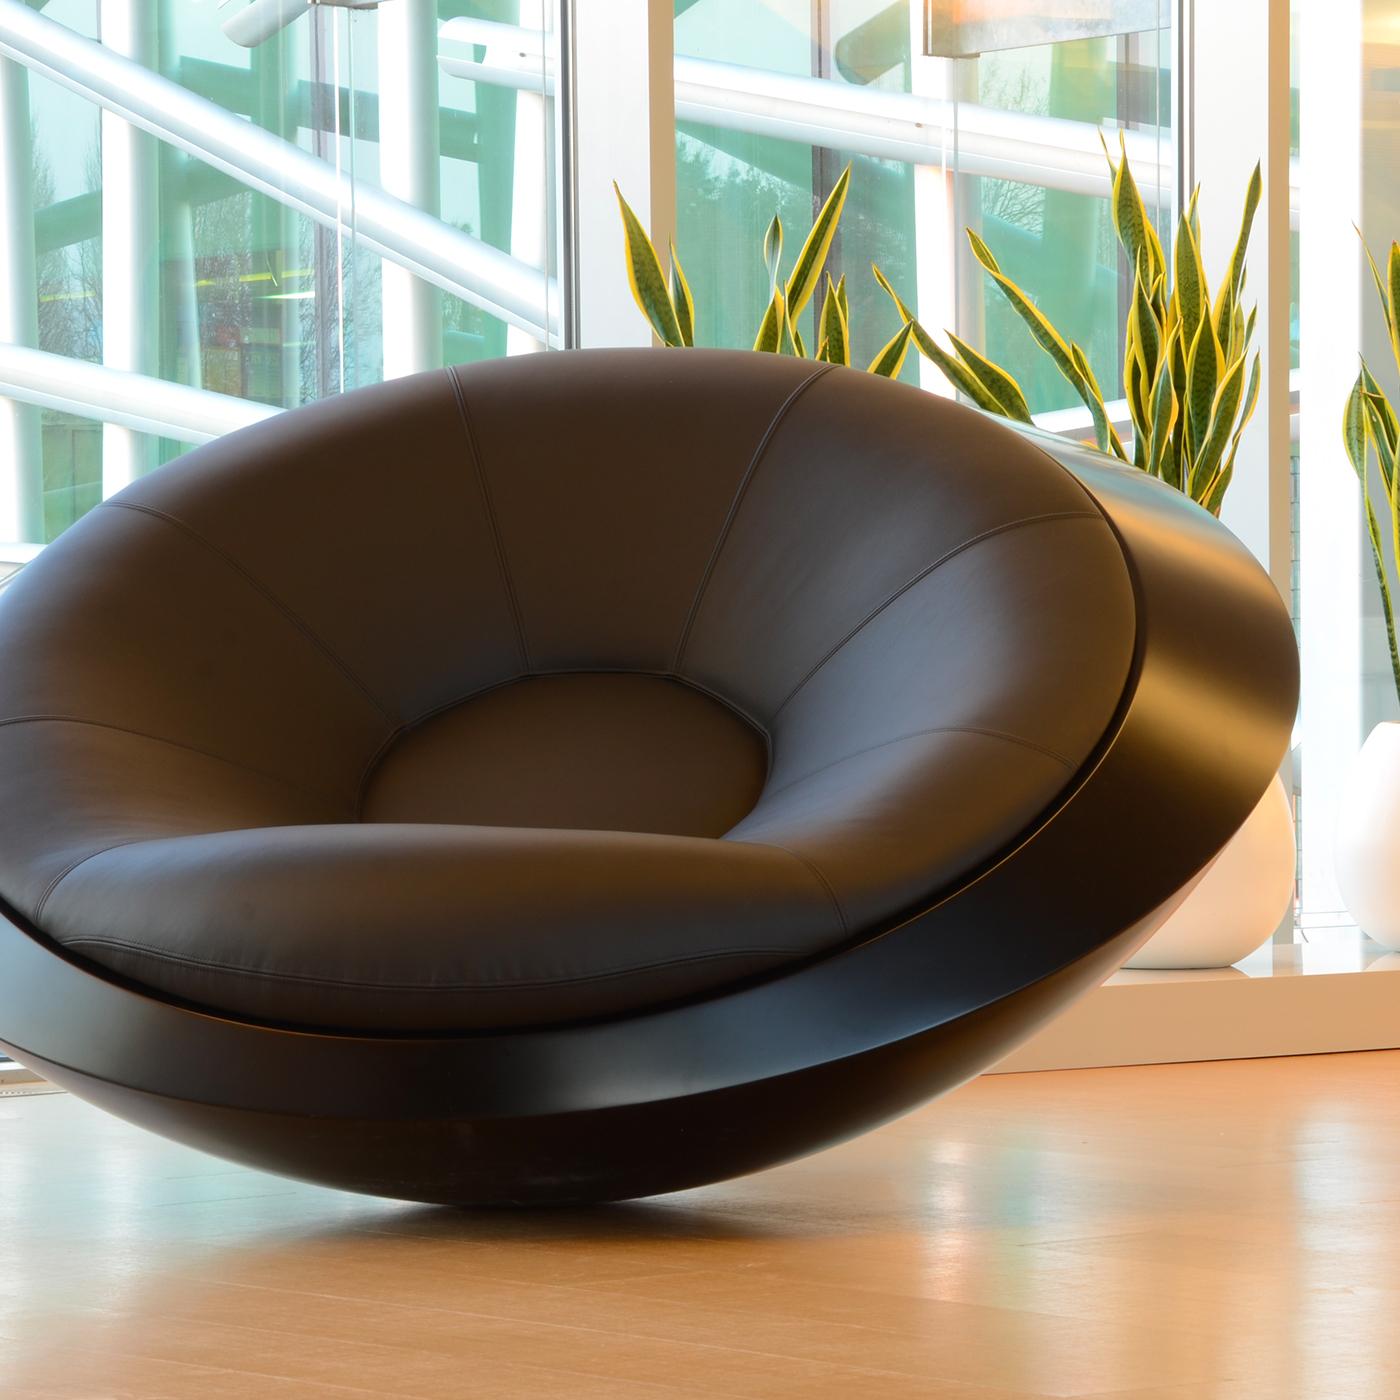 Uniquely handcrafted to order, this exquisitely designed armchair boasts a minimal and contemporary allure. Entirely made in black, it exudes elegance and sophistication. The large and comfortable cushion that can accommodate two people is filled